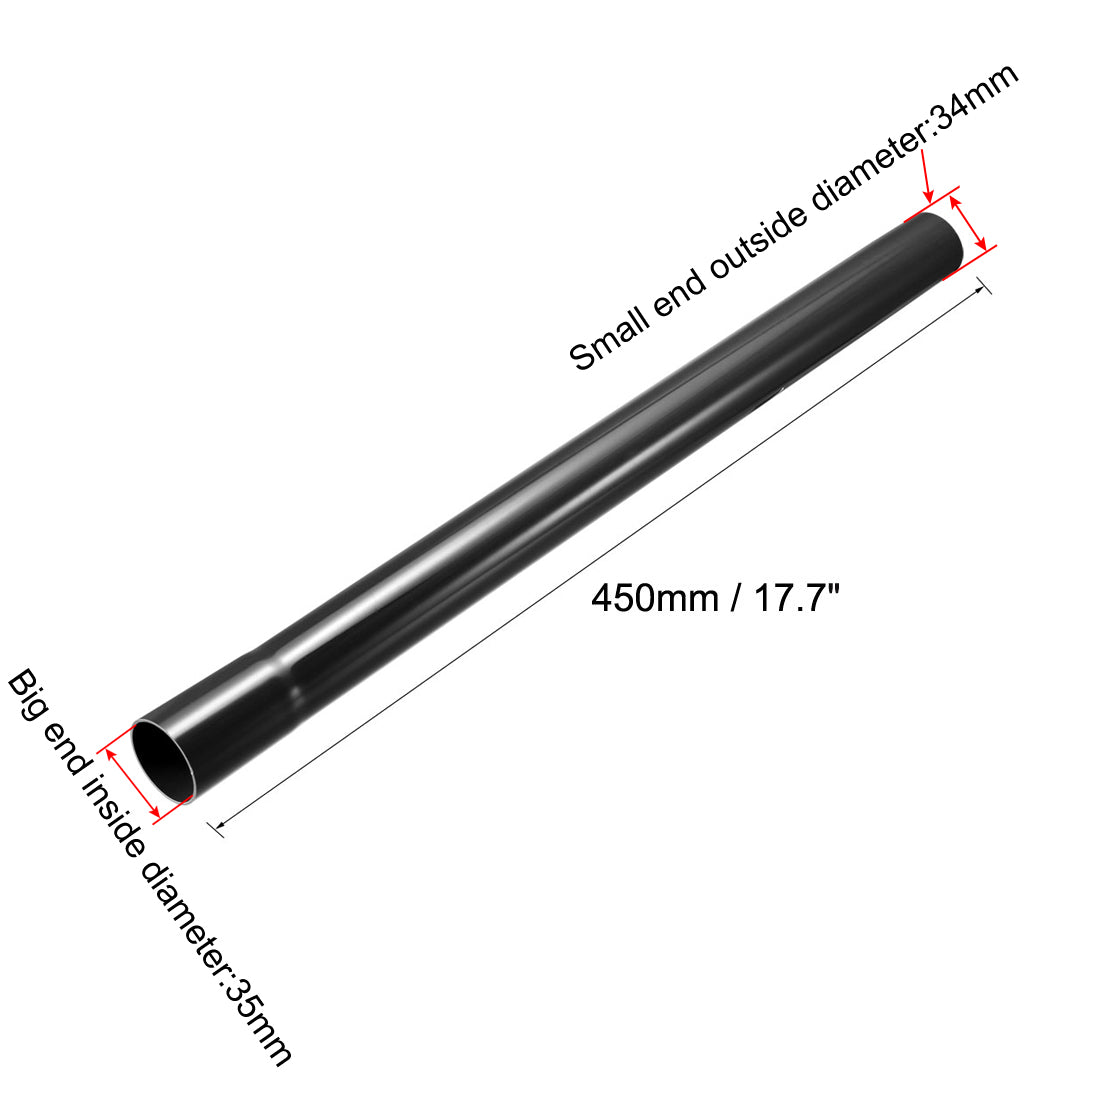 uxcell Uxcell Extension Wand 35mm Plastic Tube Hose 45cm Length Extend Vacuum Cleaner Accessory Black